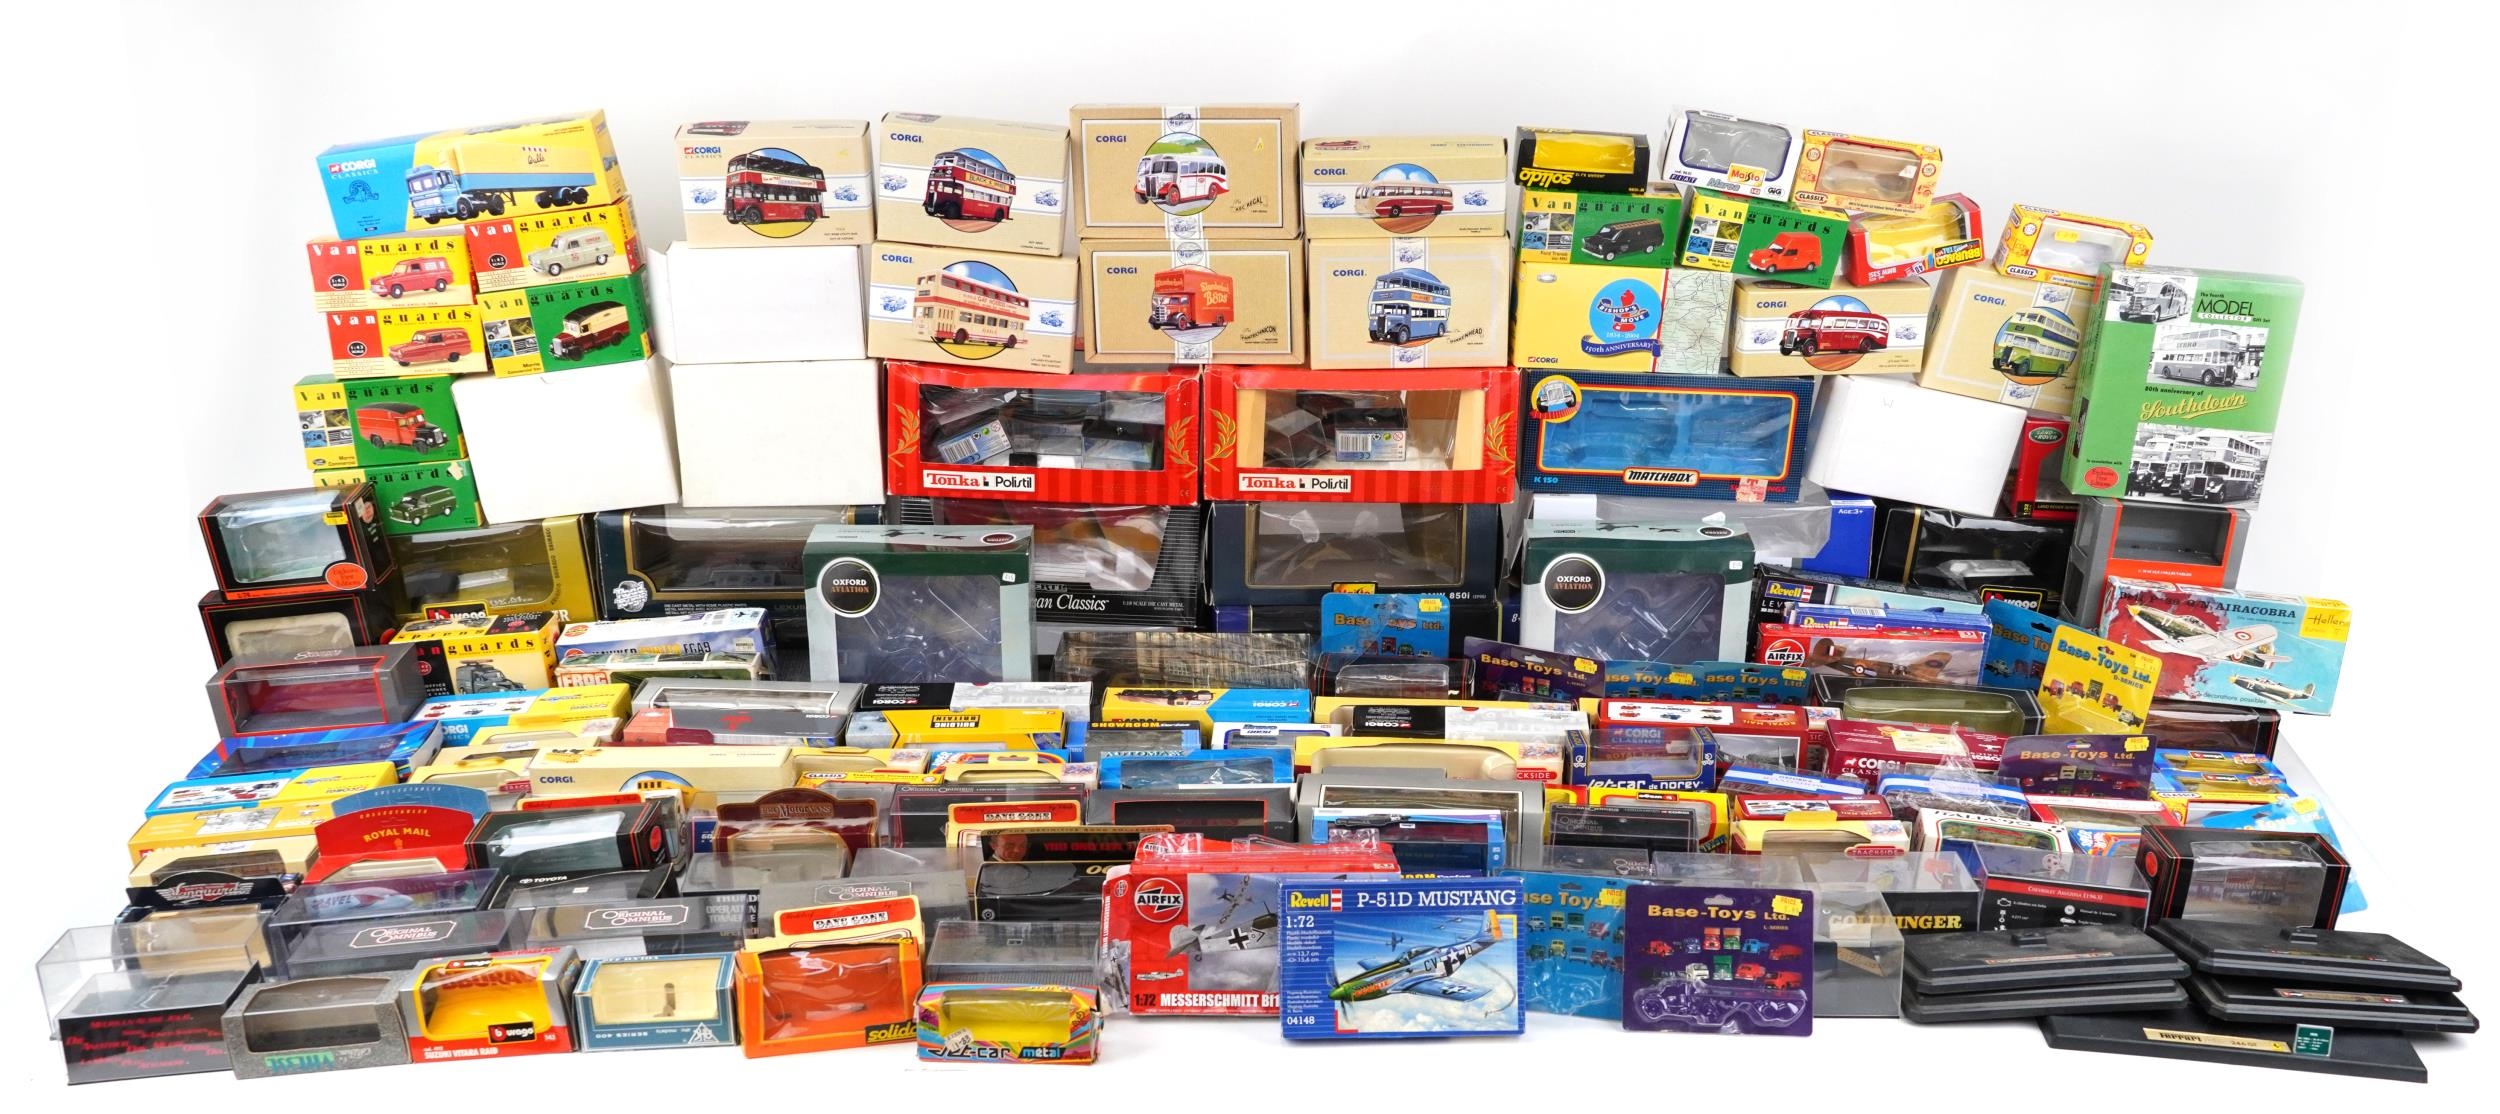 Extensive collection of model collector's vehicle boxes